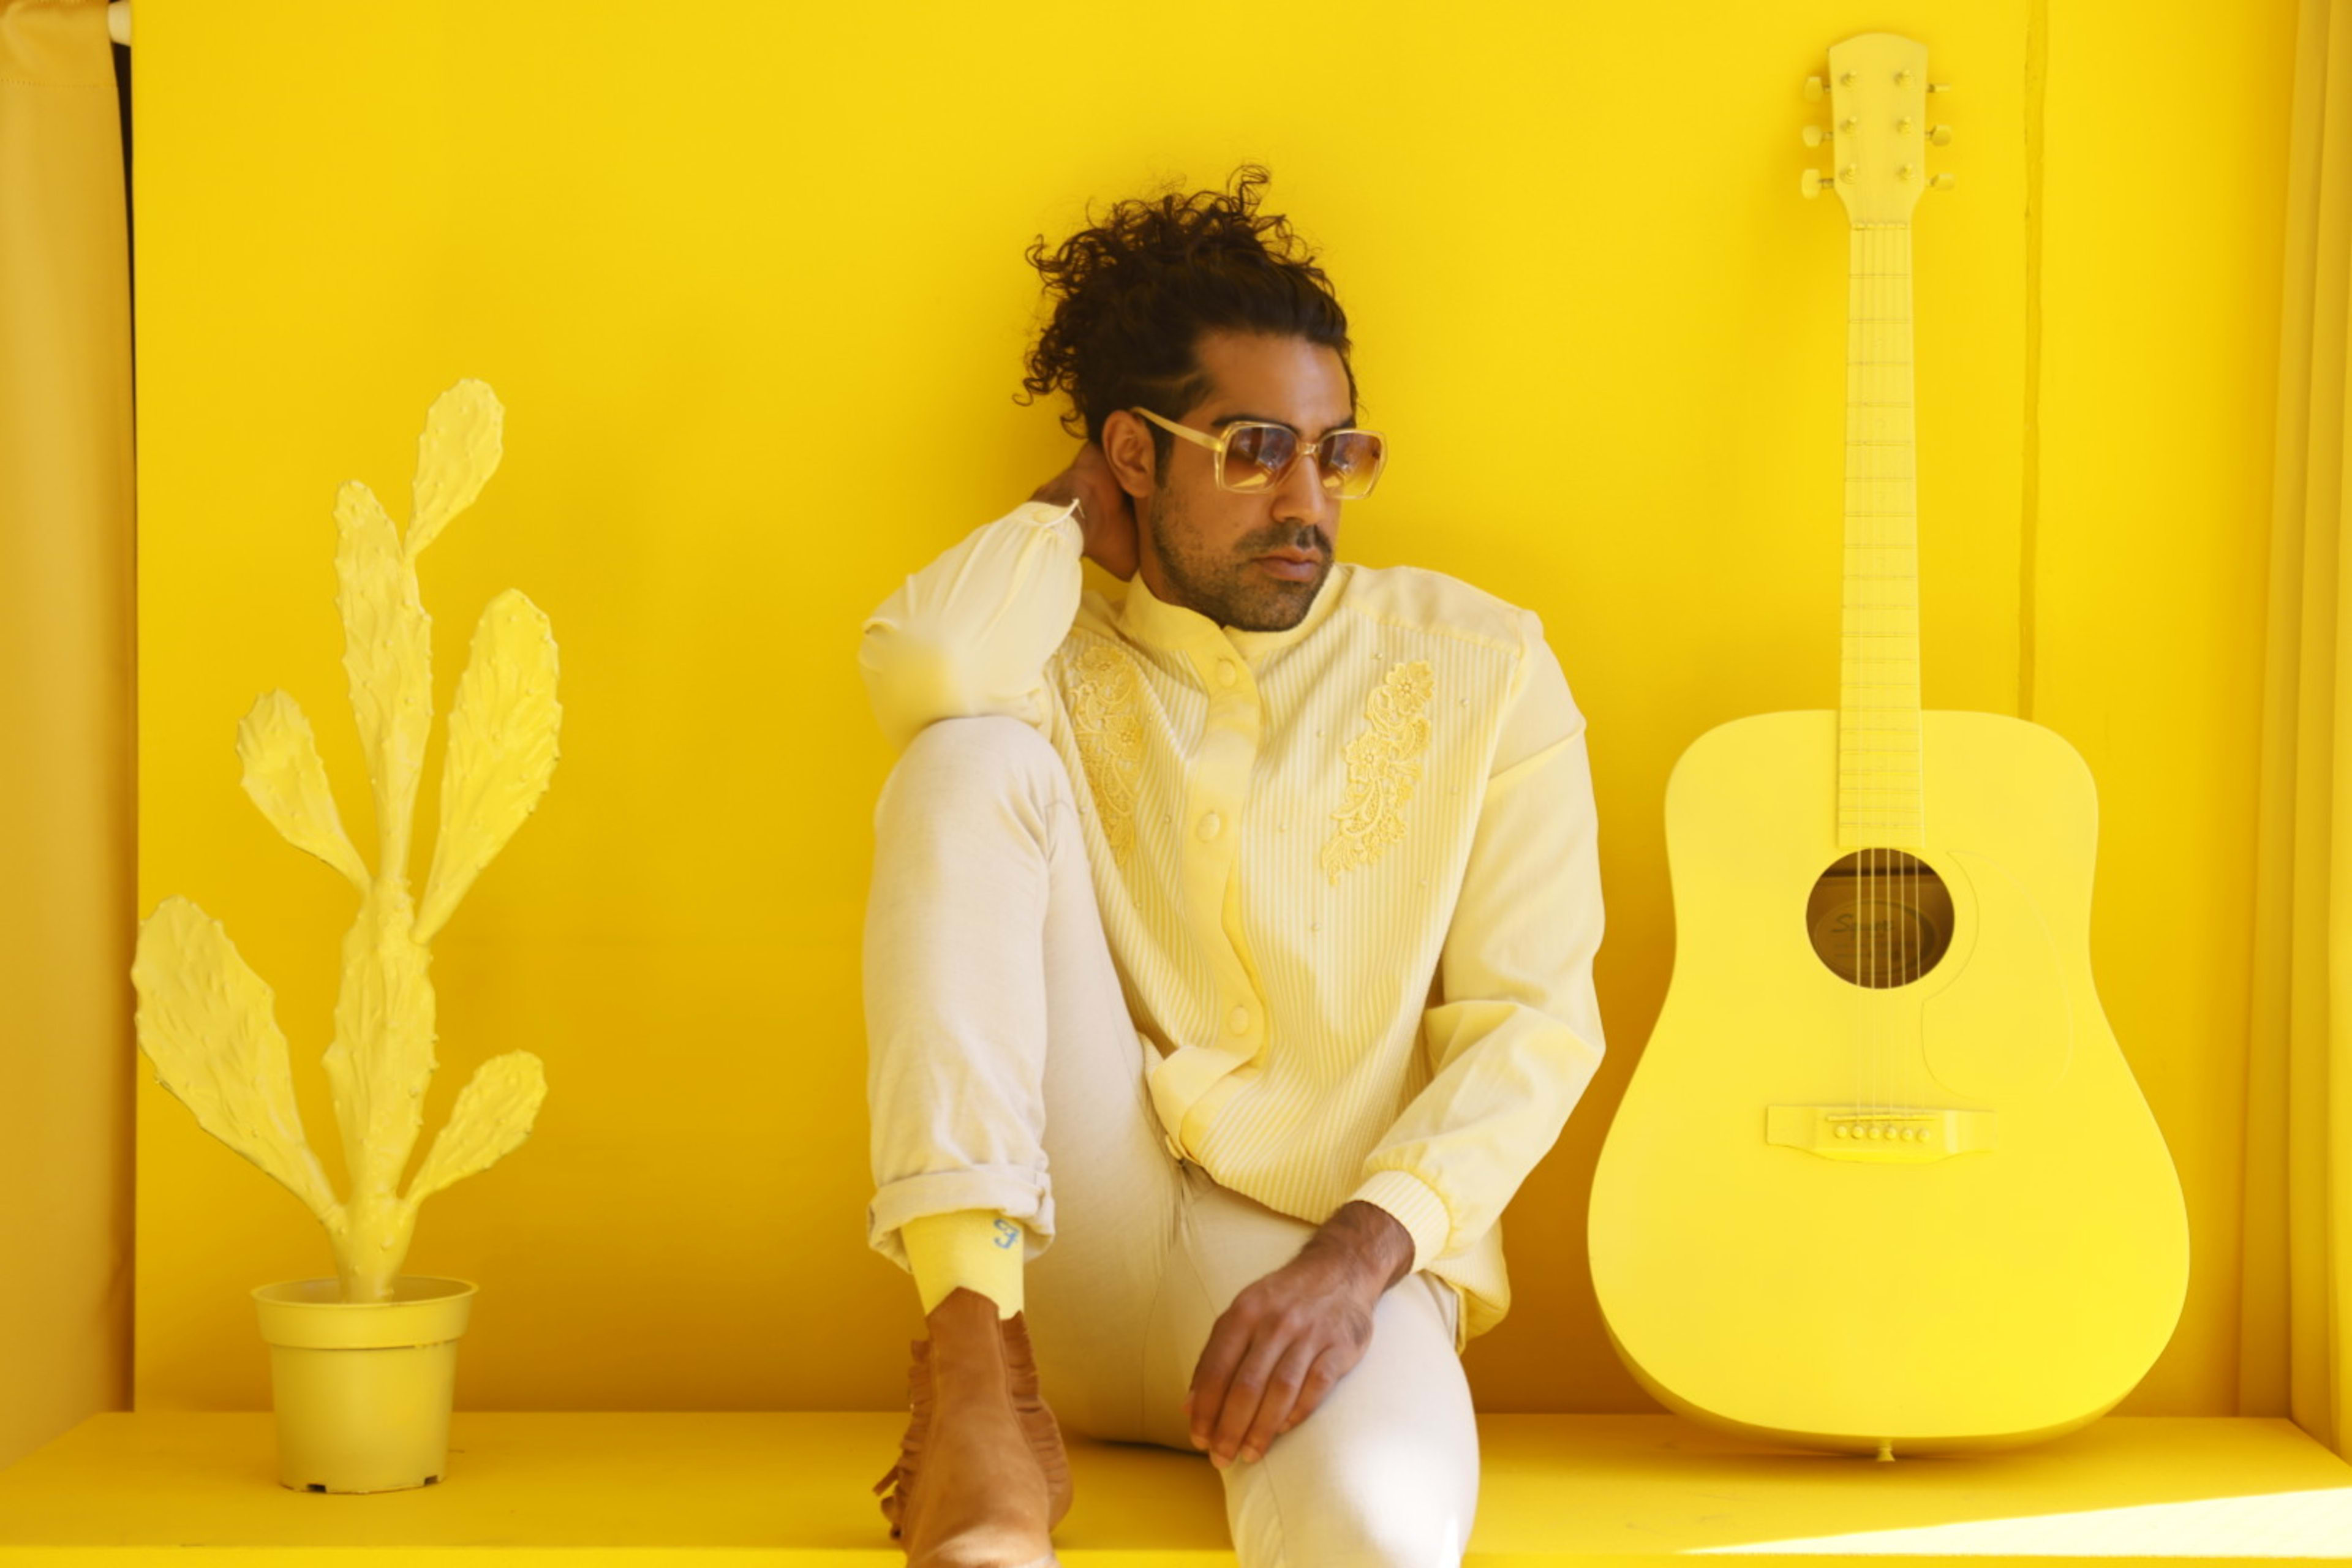 A retro photo shoot featuring a man sitting on a yellow shelf with a guitar.